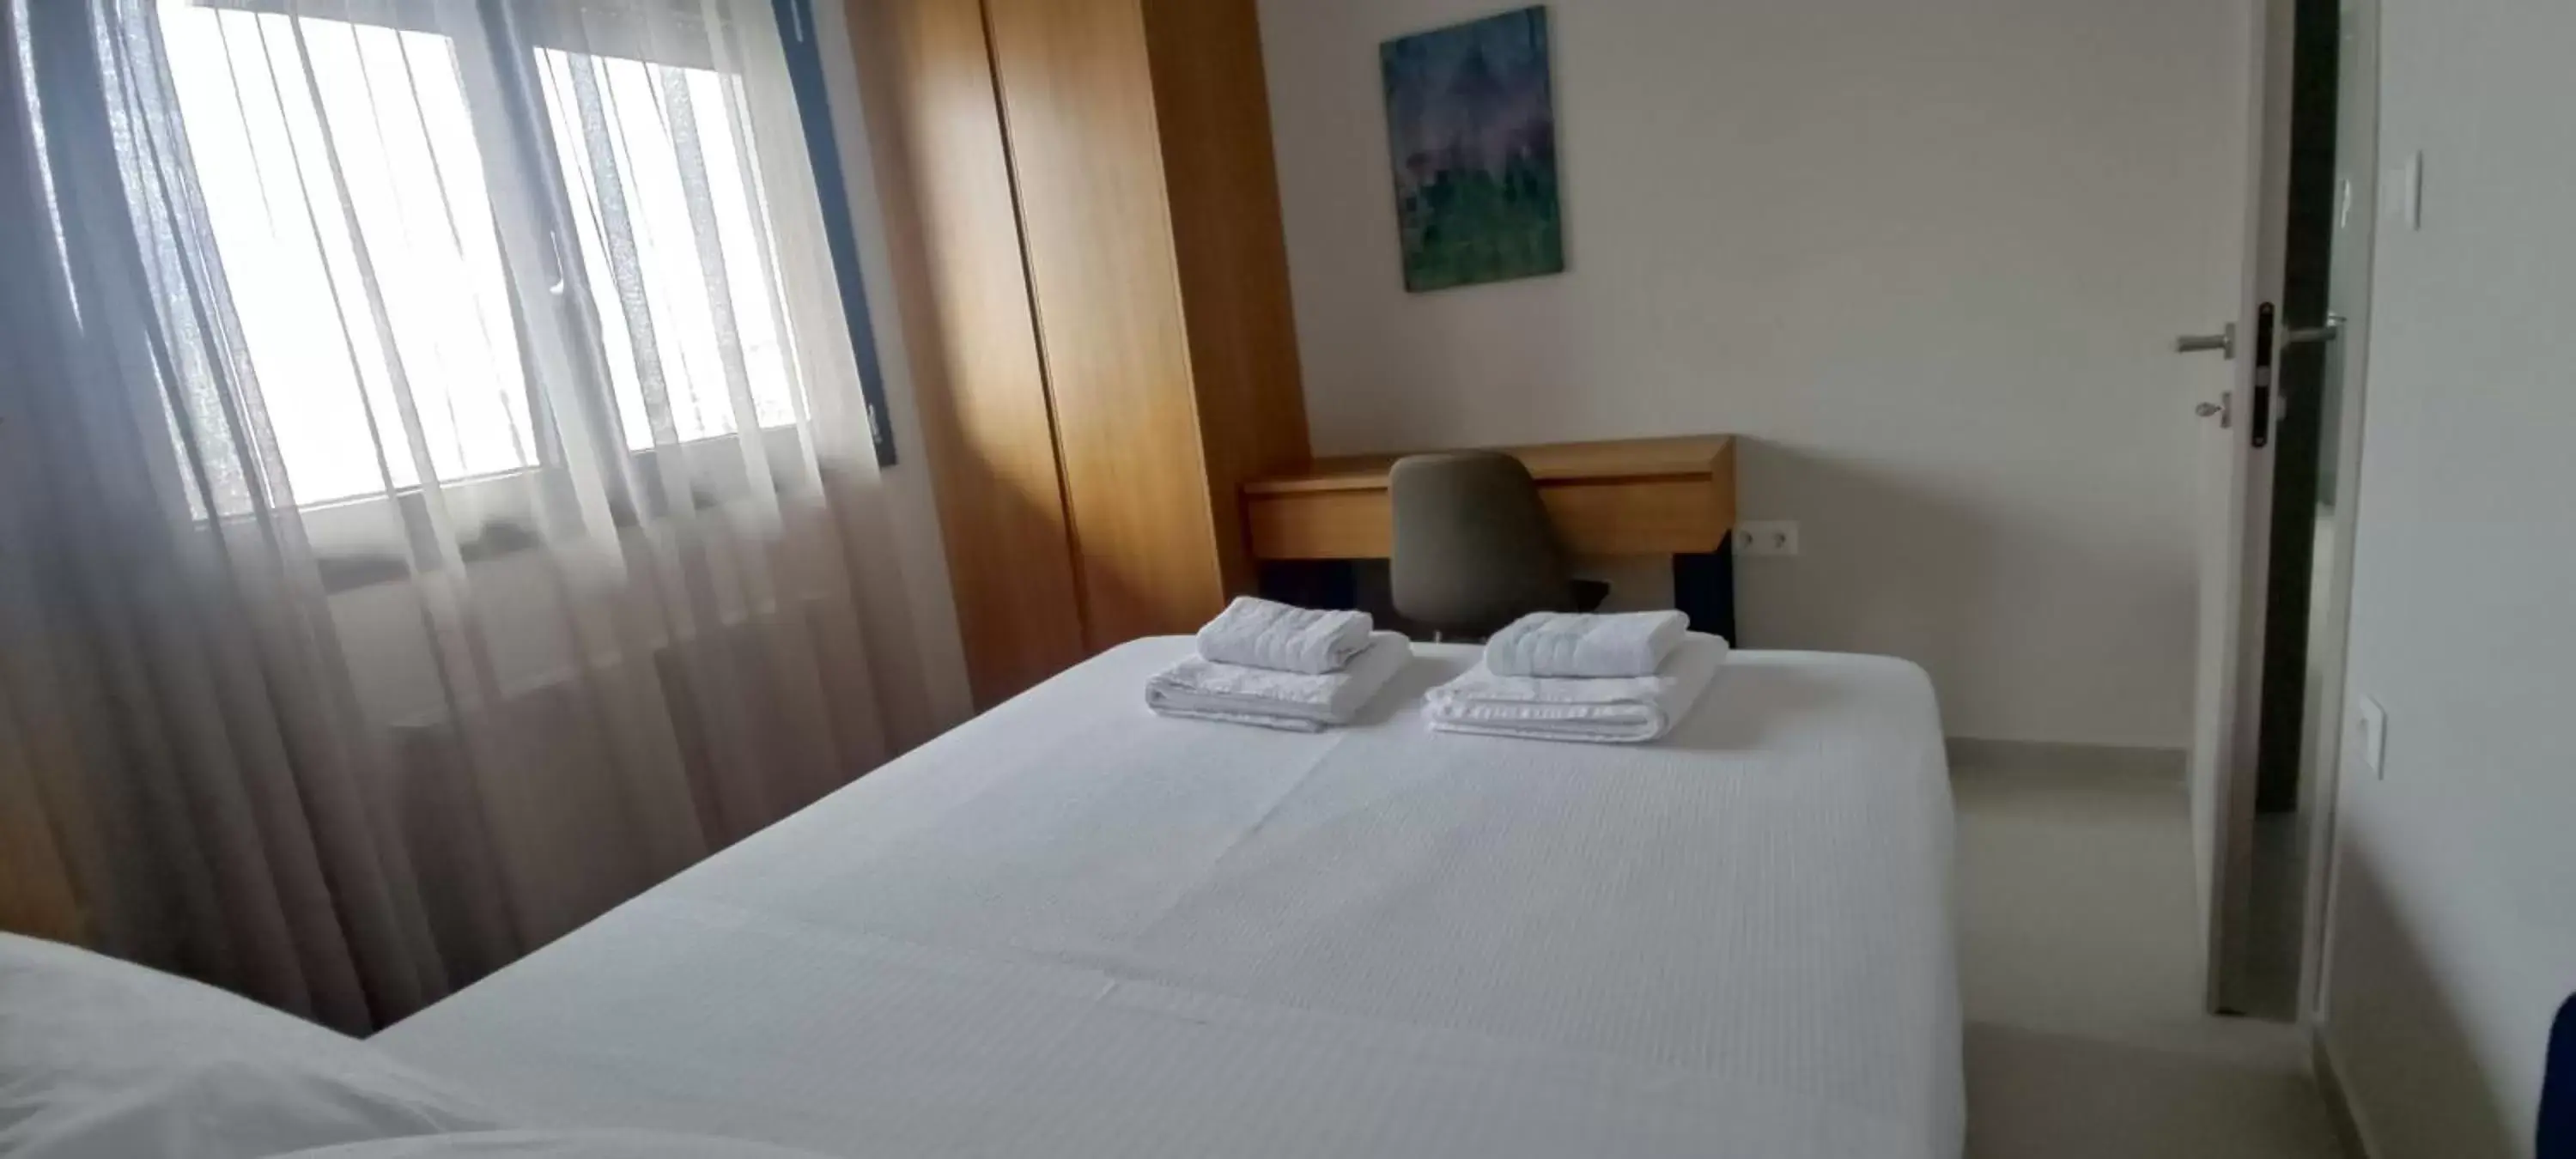 Bed in Toumba apartments